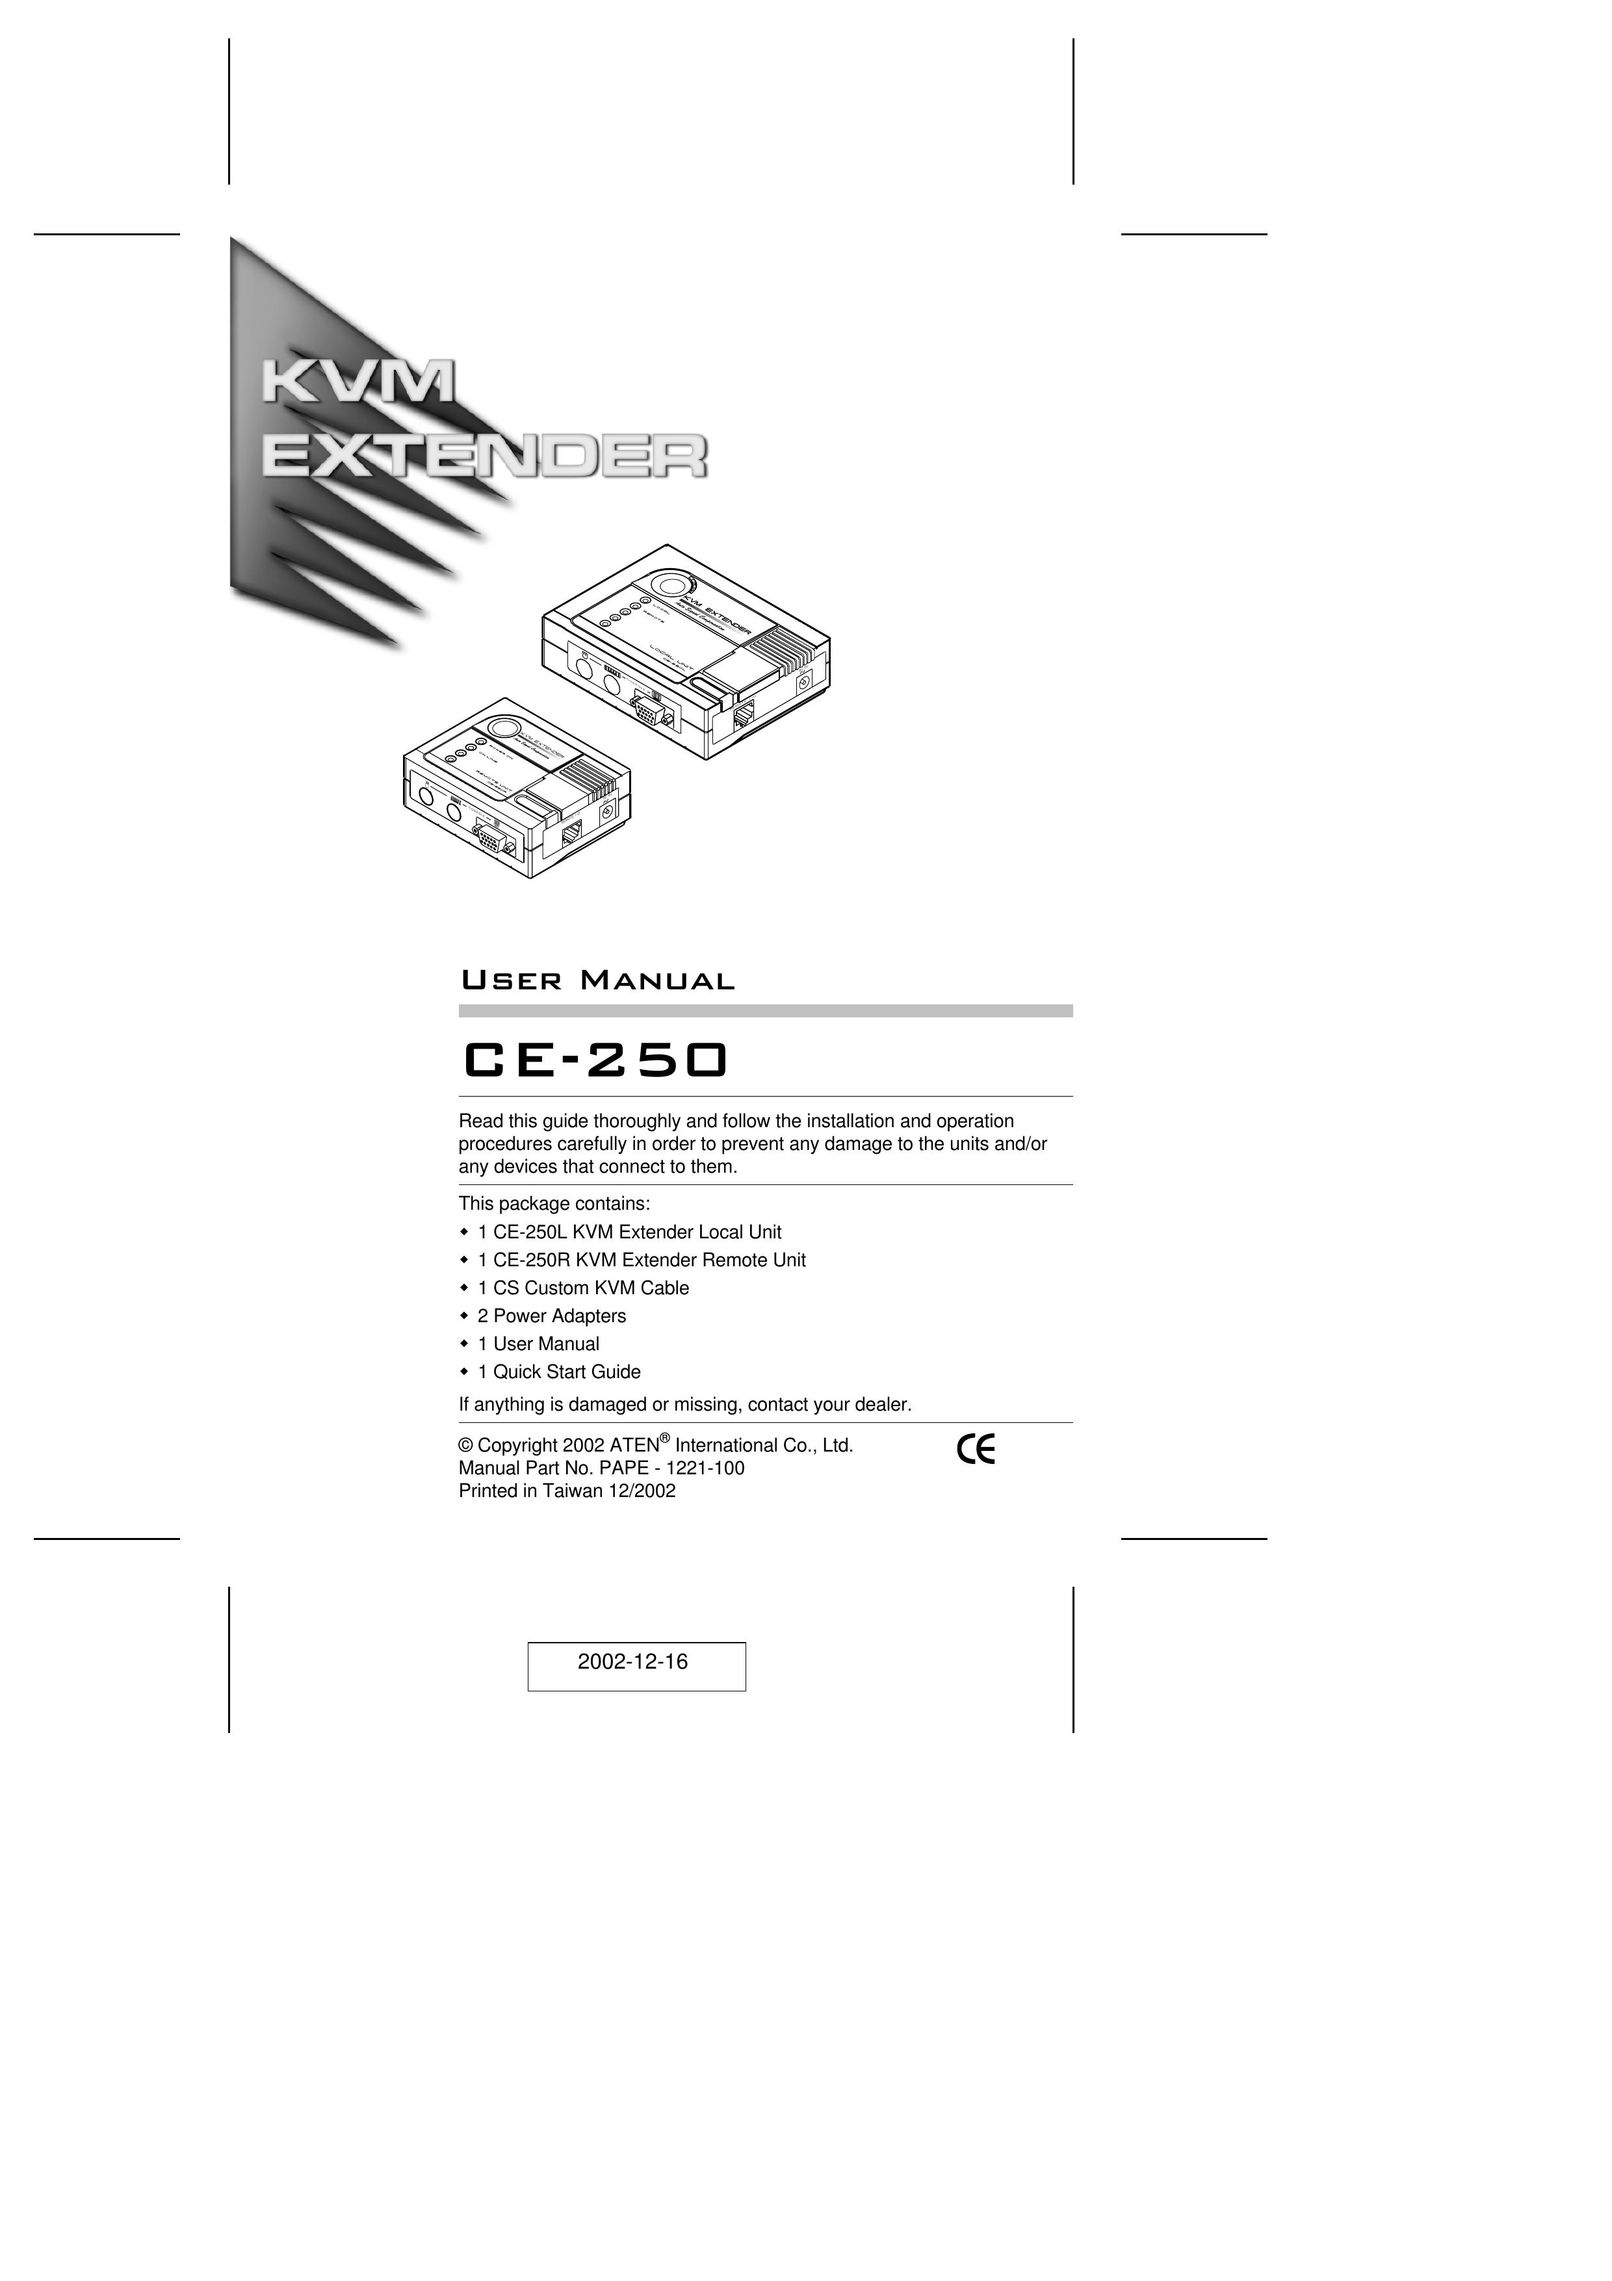 ATEN Technology CE-250 Switch User Manual